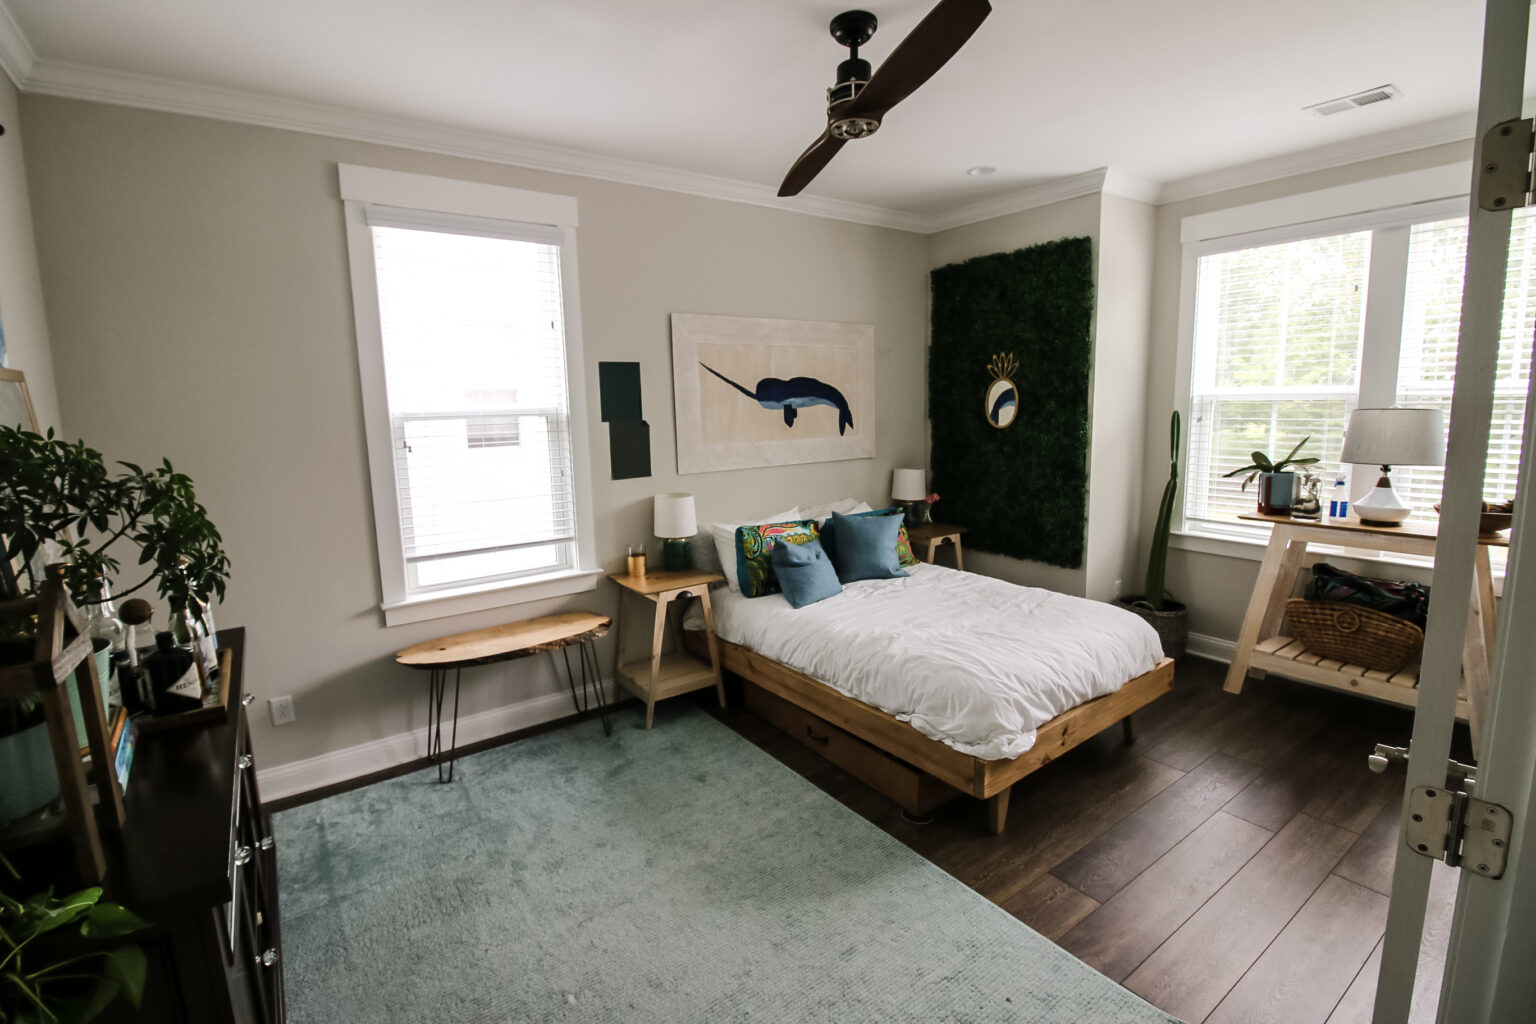 A gold and green guest bedroom makeover